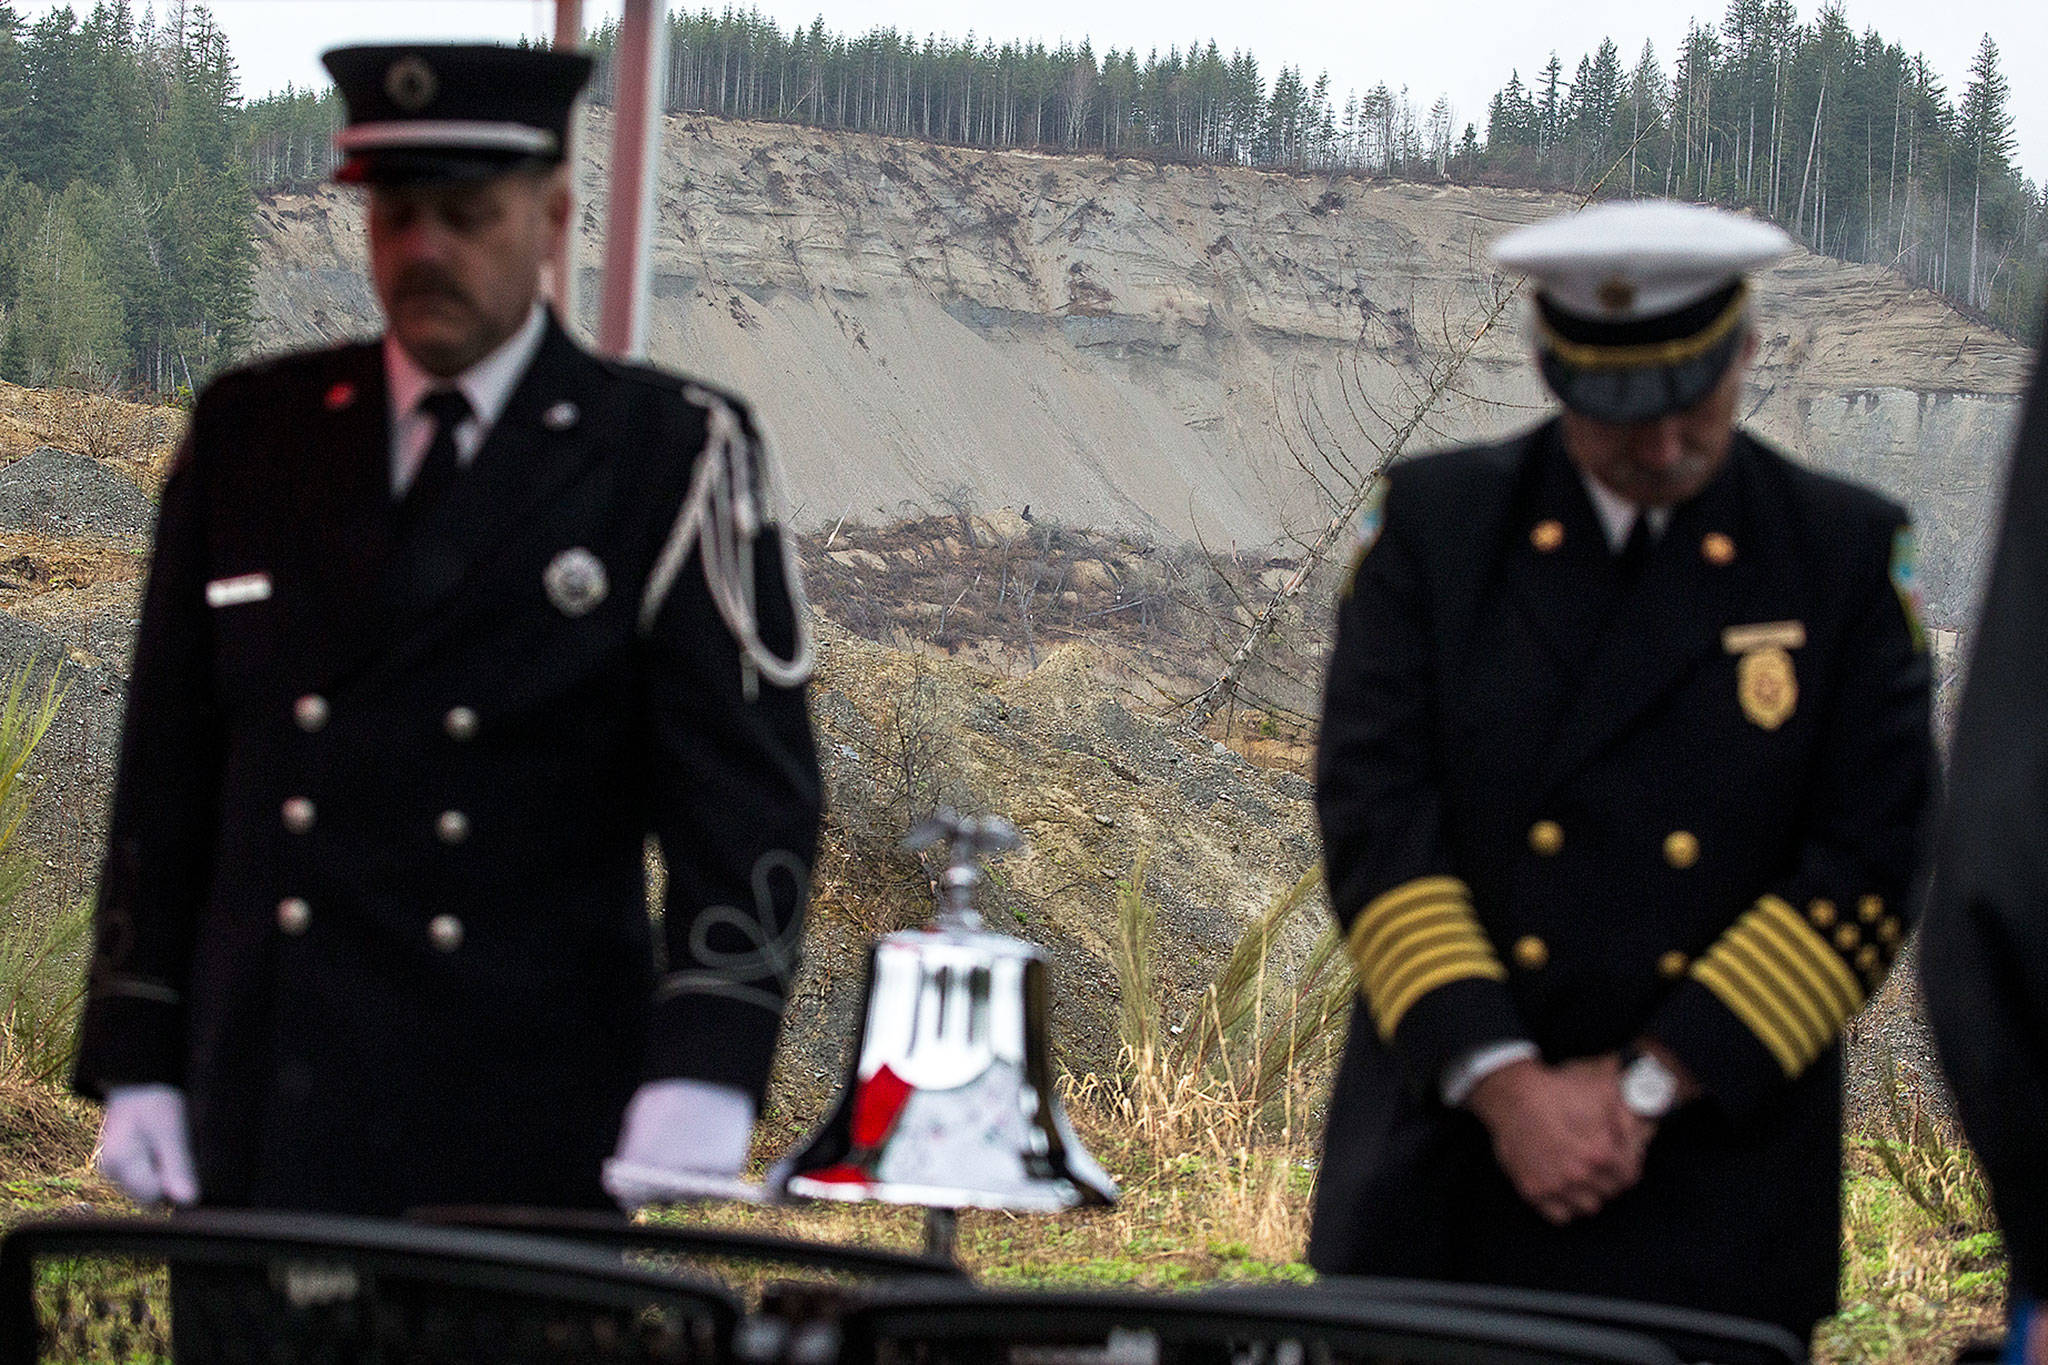 In view of the Oso mudslide, a bell ceremony is conducted during a gathering for family and friends of victims on Thursday to honor those killed in the March 22, 2014, tragedy. (Ian Terry / The Herald)